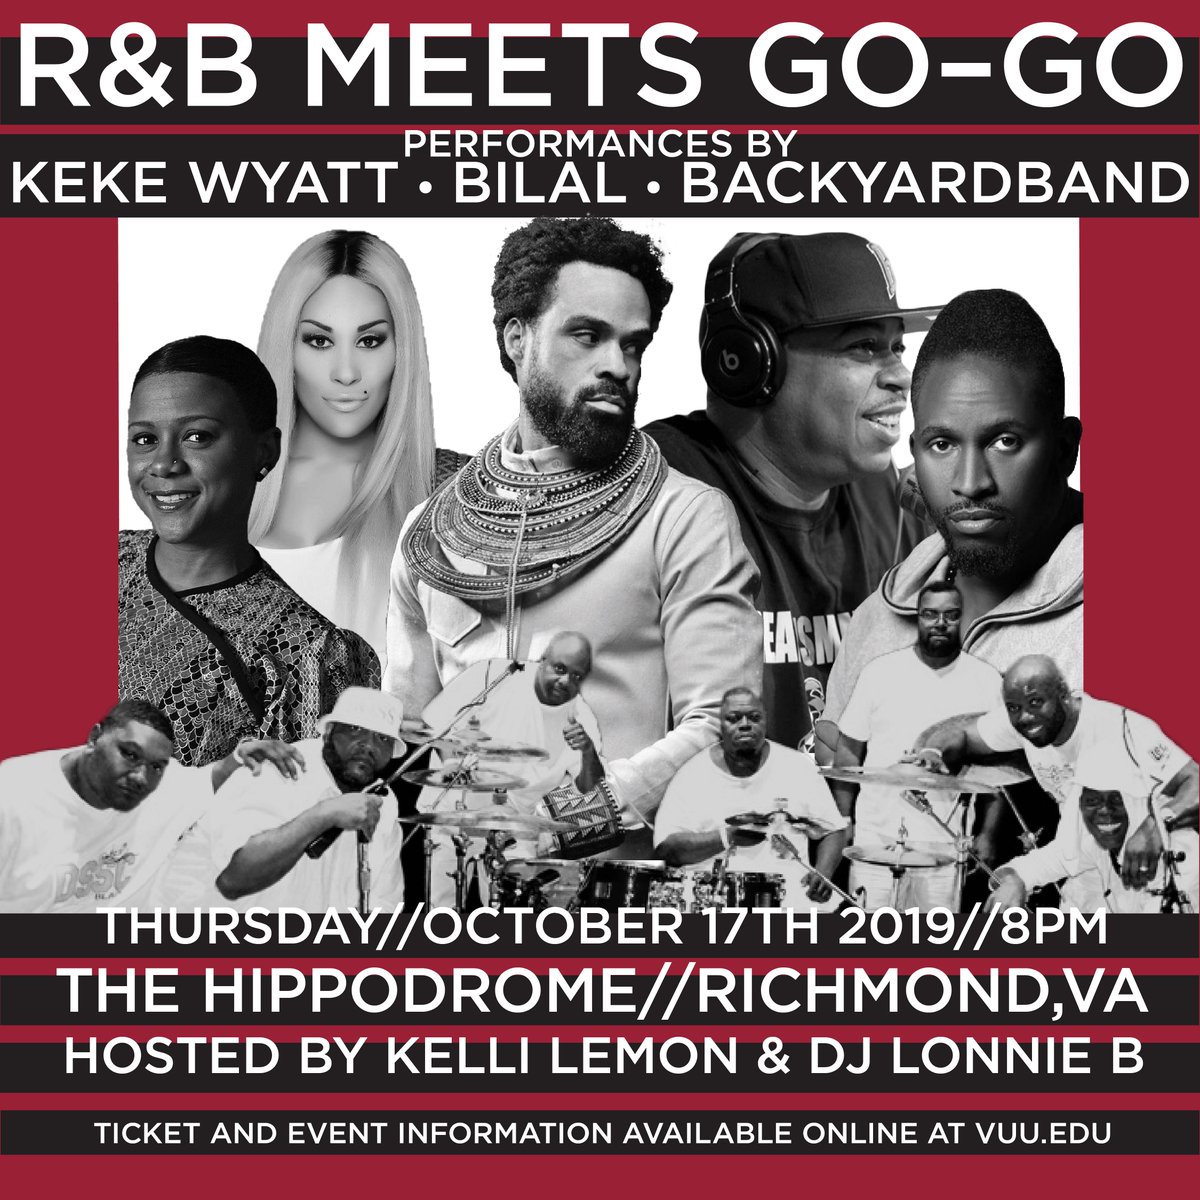 Get ready to dance the night away as R&B and Go-Go music come together at the @HippodromeRVA with special guests @KeKeWyattSings @Bilal @likethefruit @djlonnieb and more! Grab tickets here: bit.ly/2lRnook